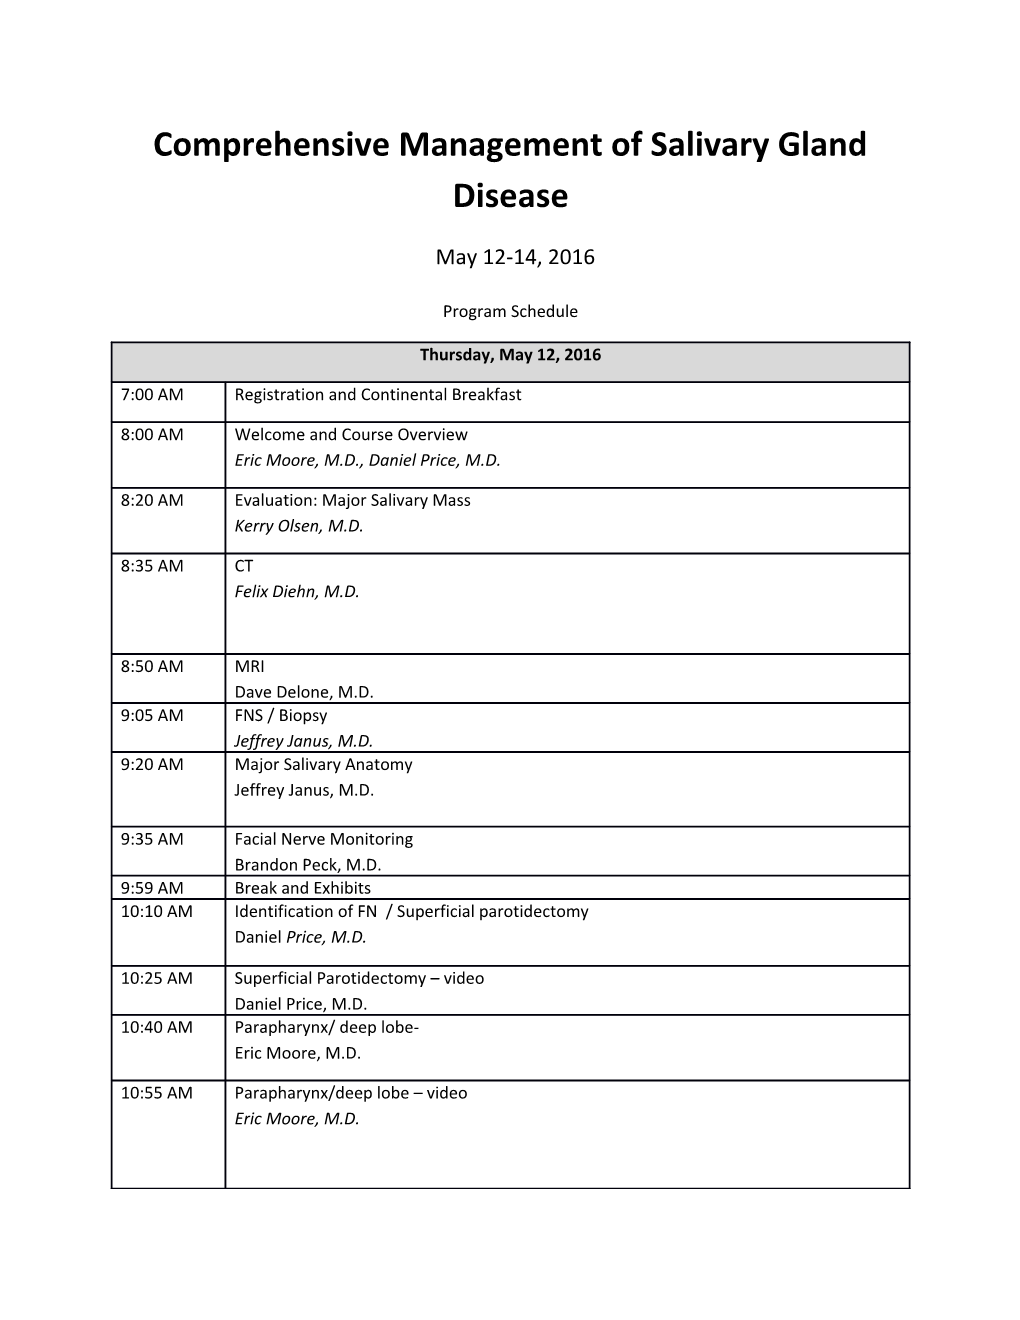 Comprehensive Management of Salivary Gland Disease May 12-14, 2016